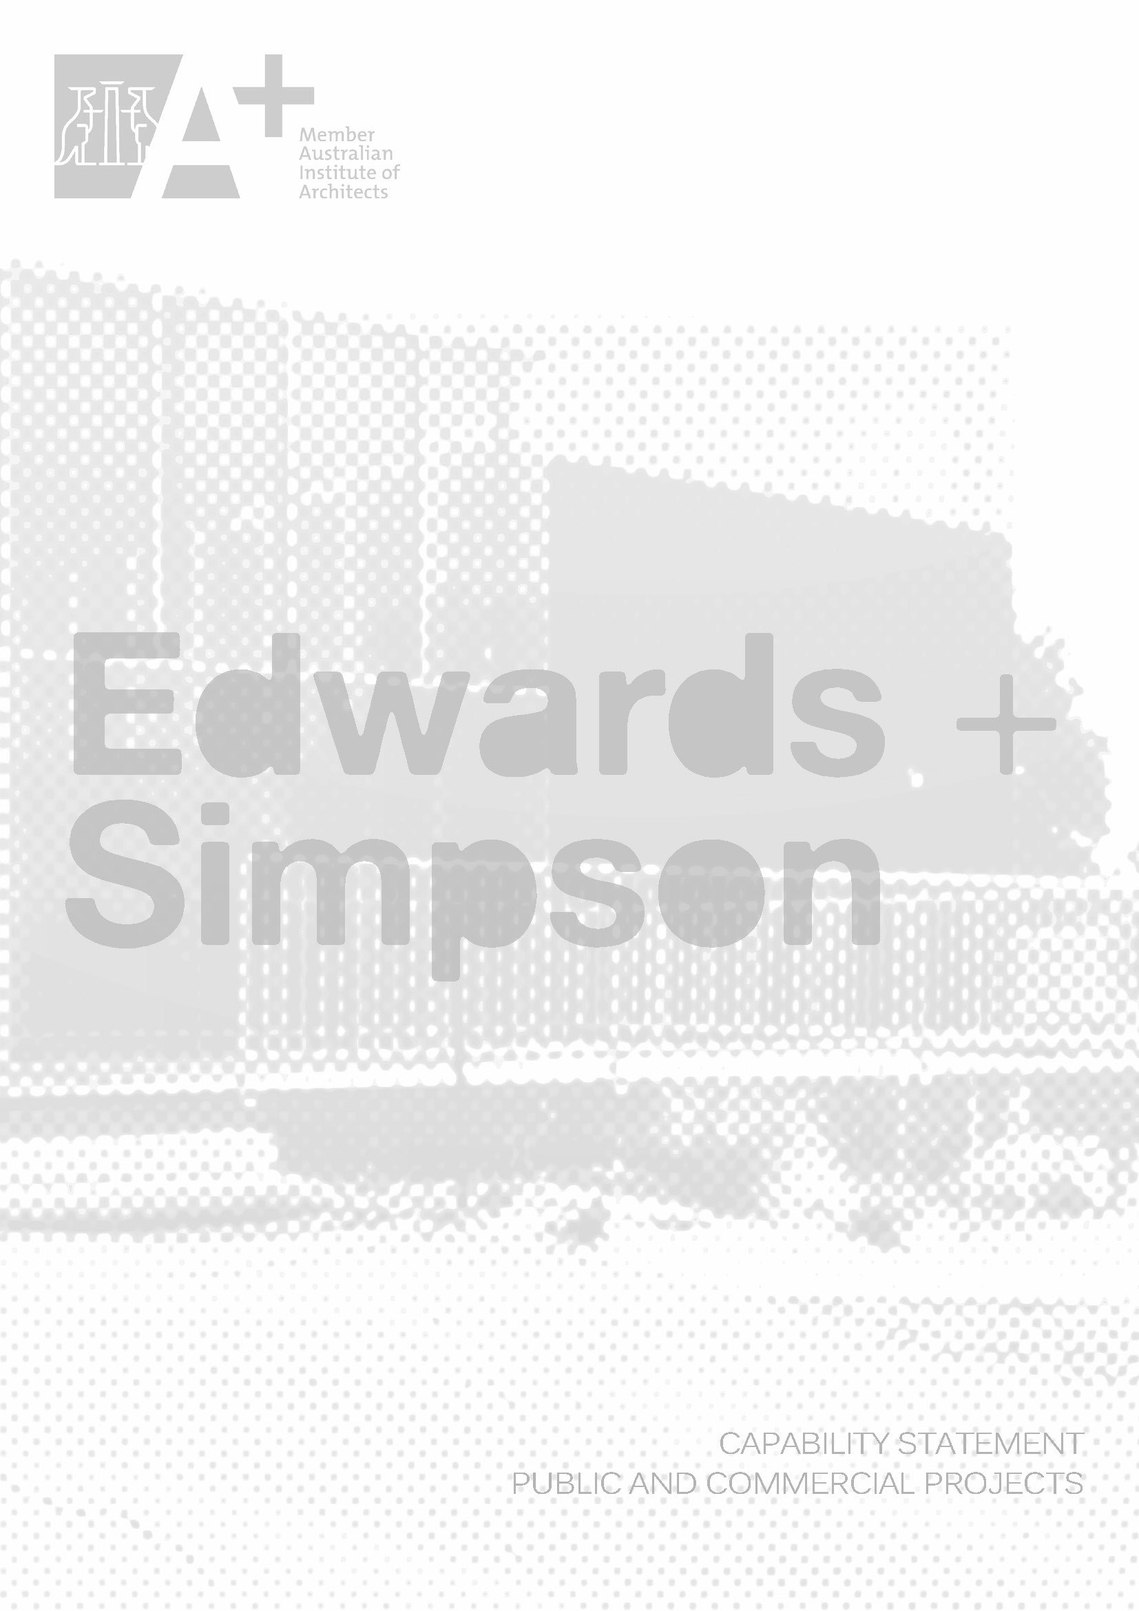 Cover art for Edwards + Simpson Capability Statement for Public and Commercial Buildings